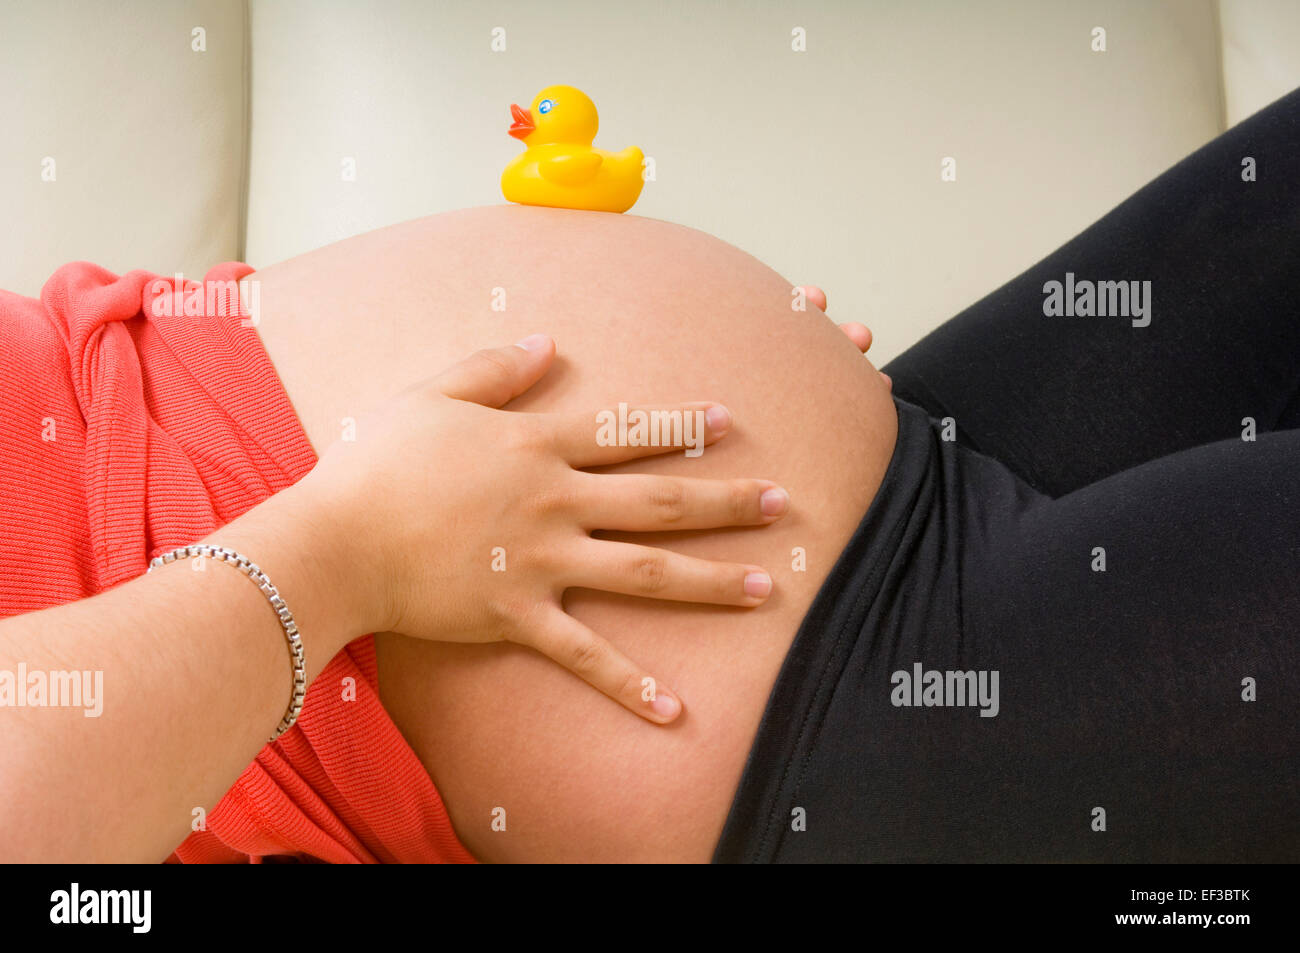 Rubber duck on a pregnant woman's belly Stock Photo